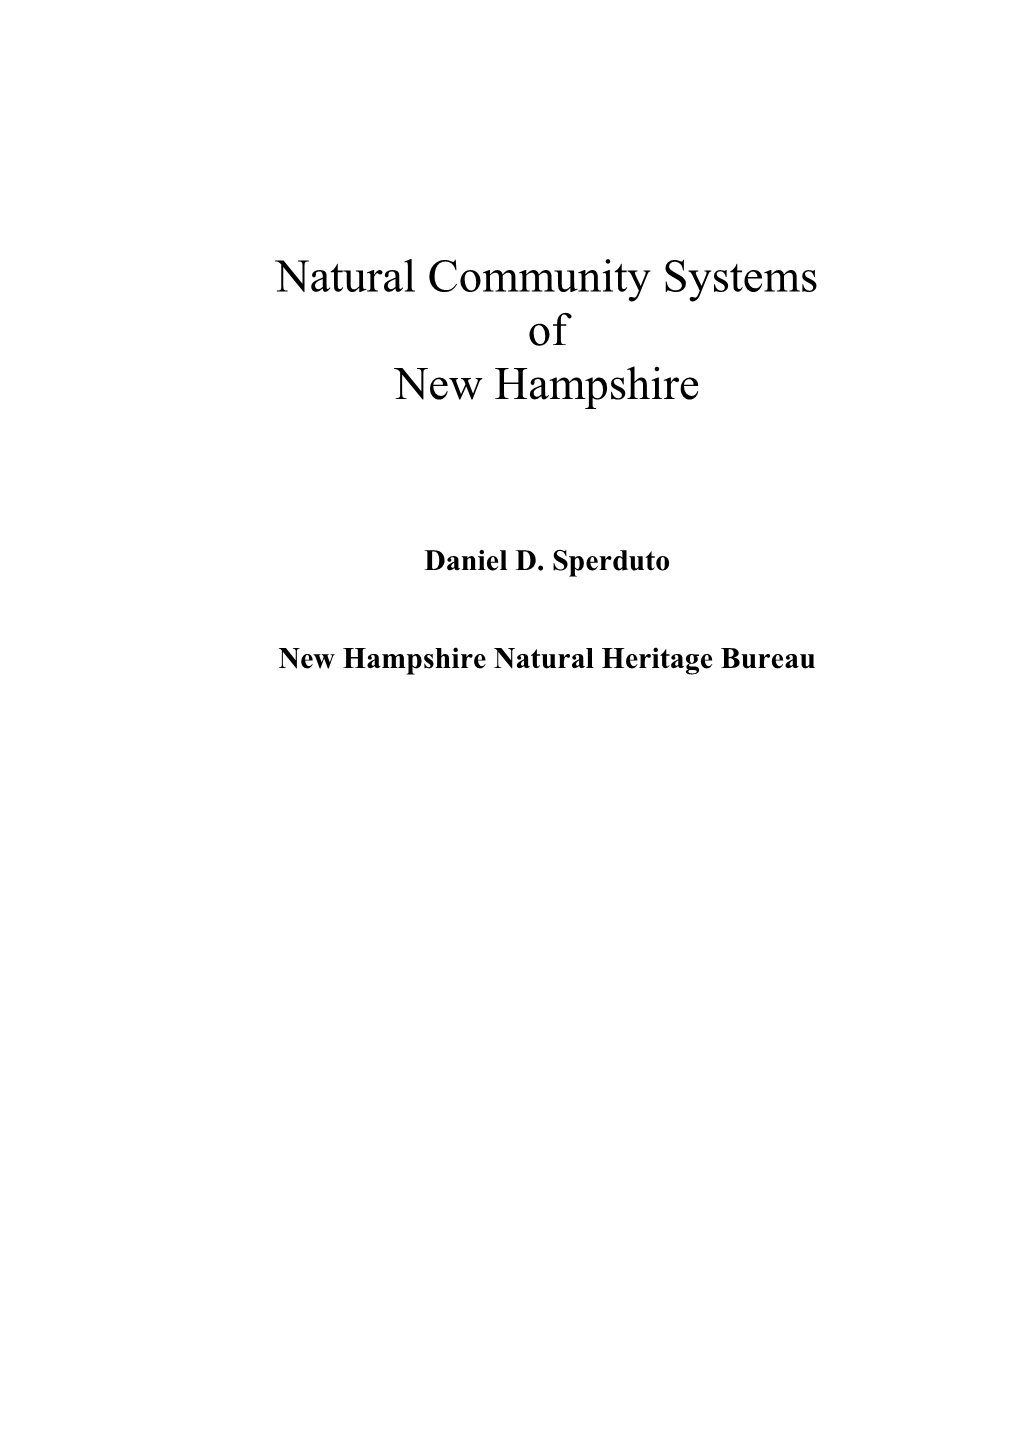 Natural Community Systems of New Hampshire: Terrestrial